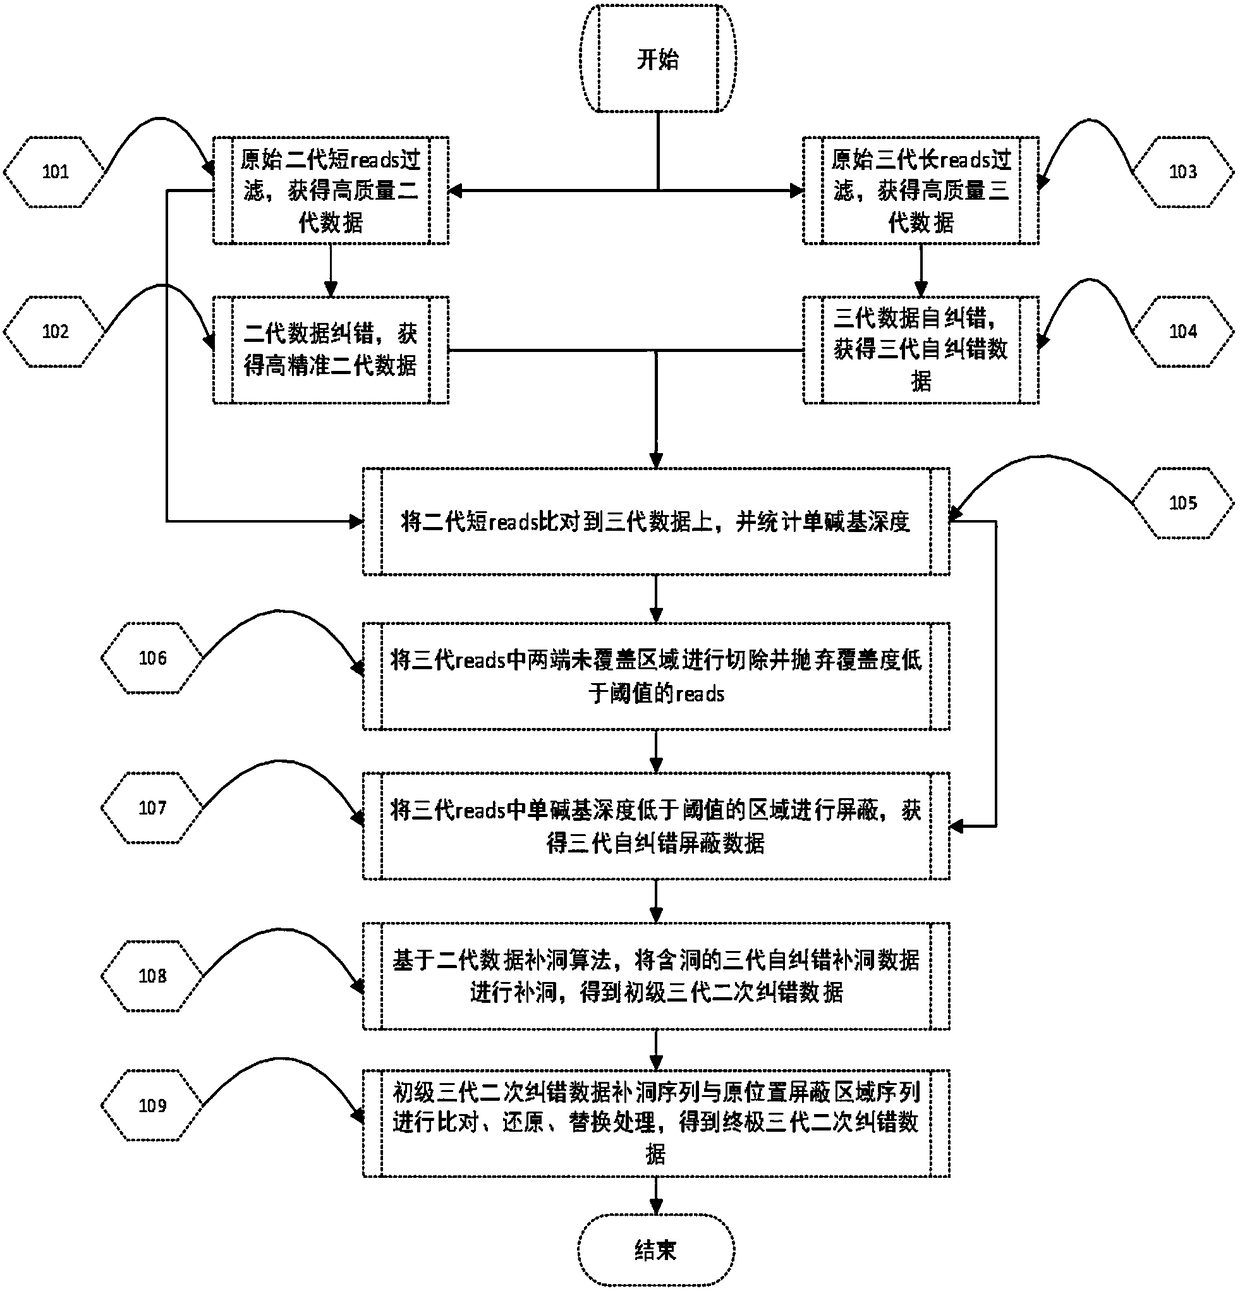 Processing method for nucleic acid third generation sequencing raw data and application thereof